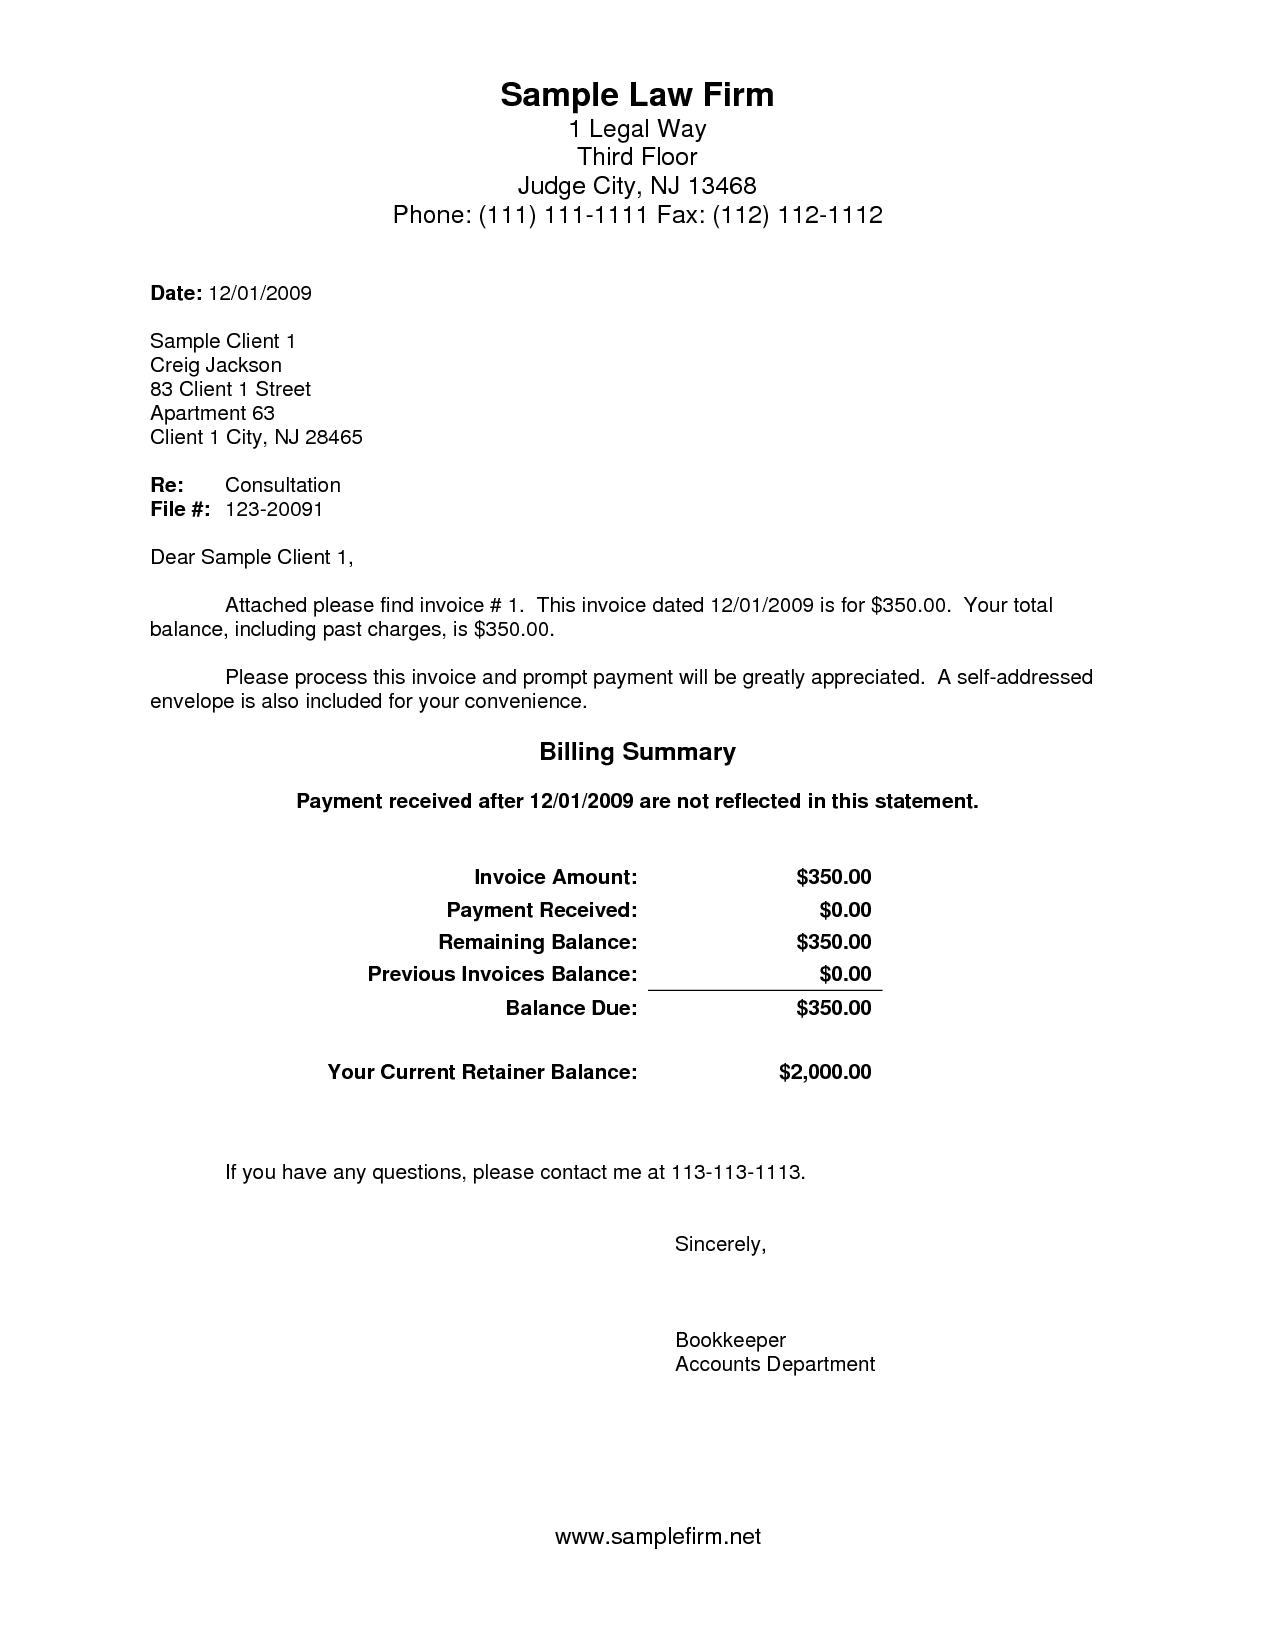 Legal Services Invoice Template